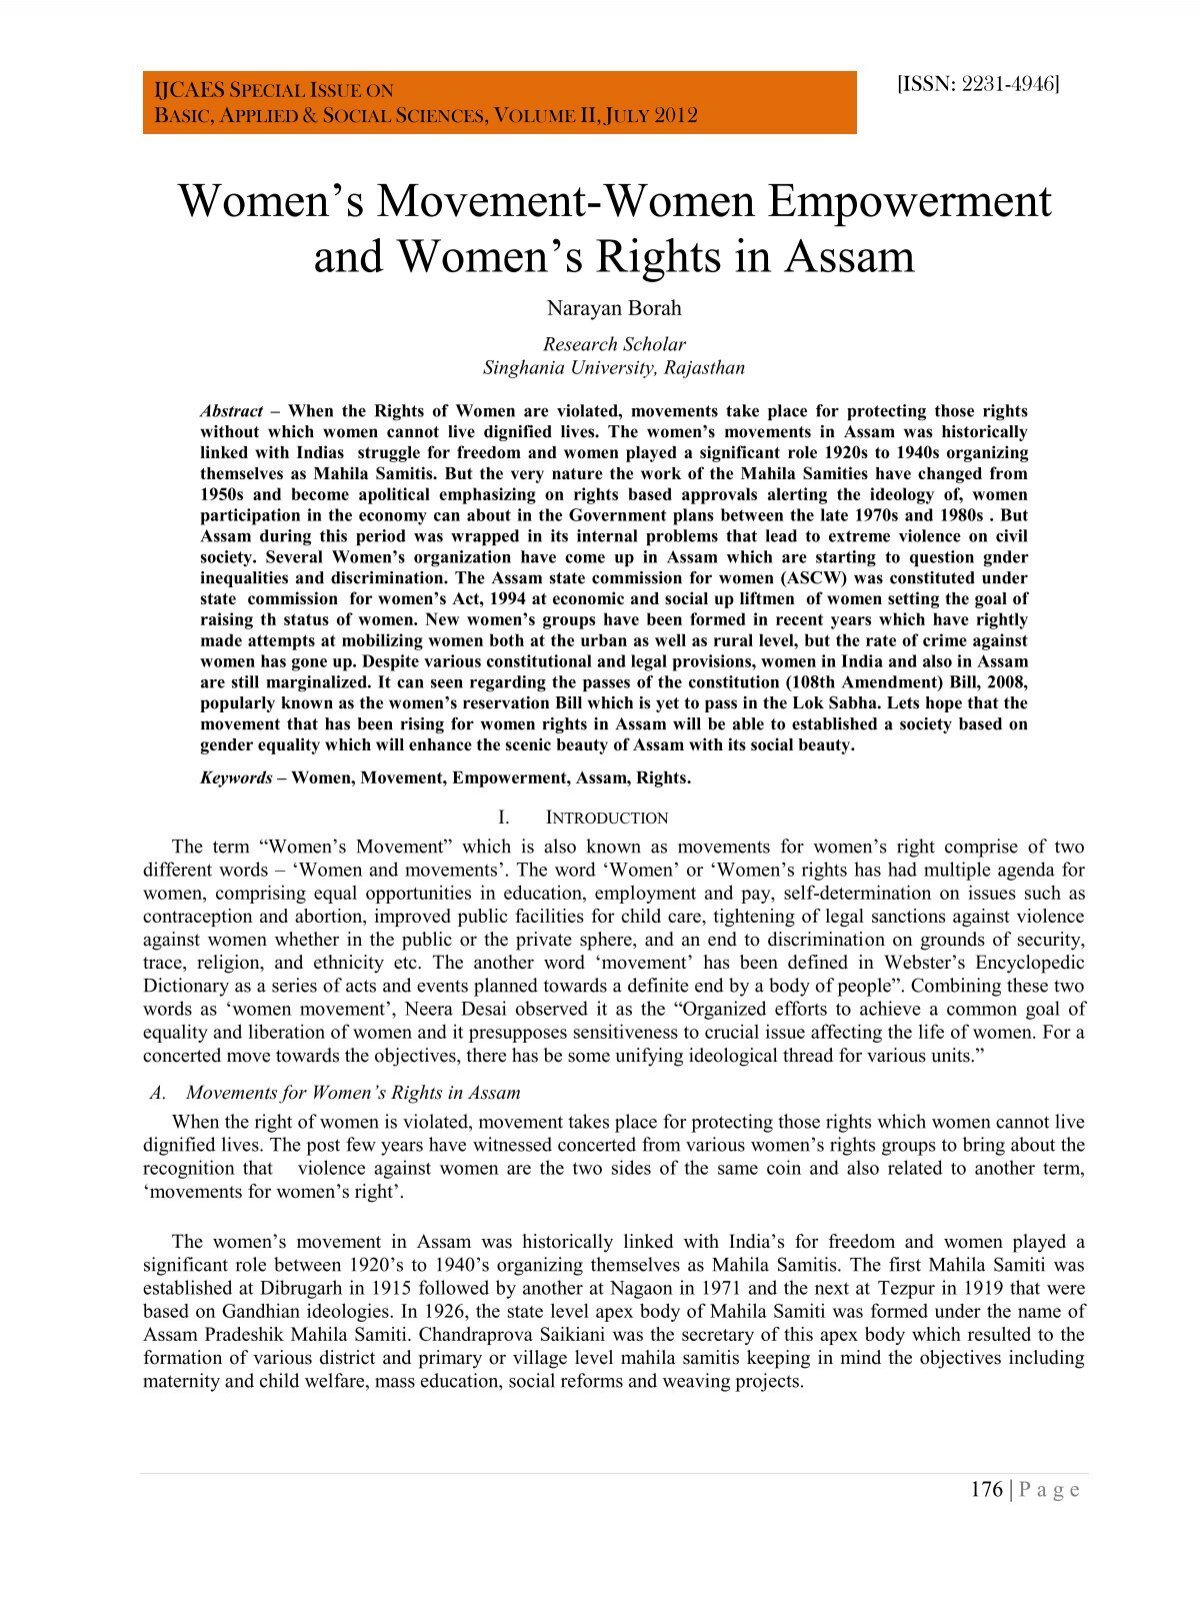 research paper on women's movement